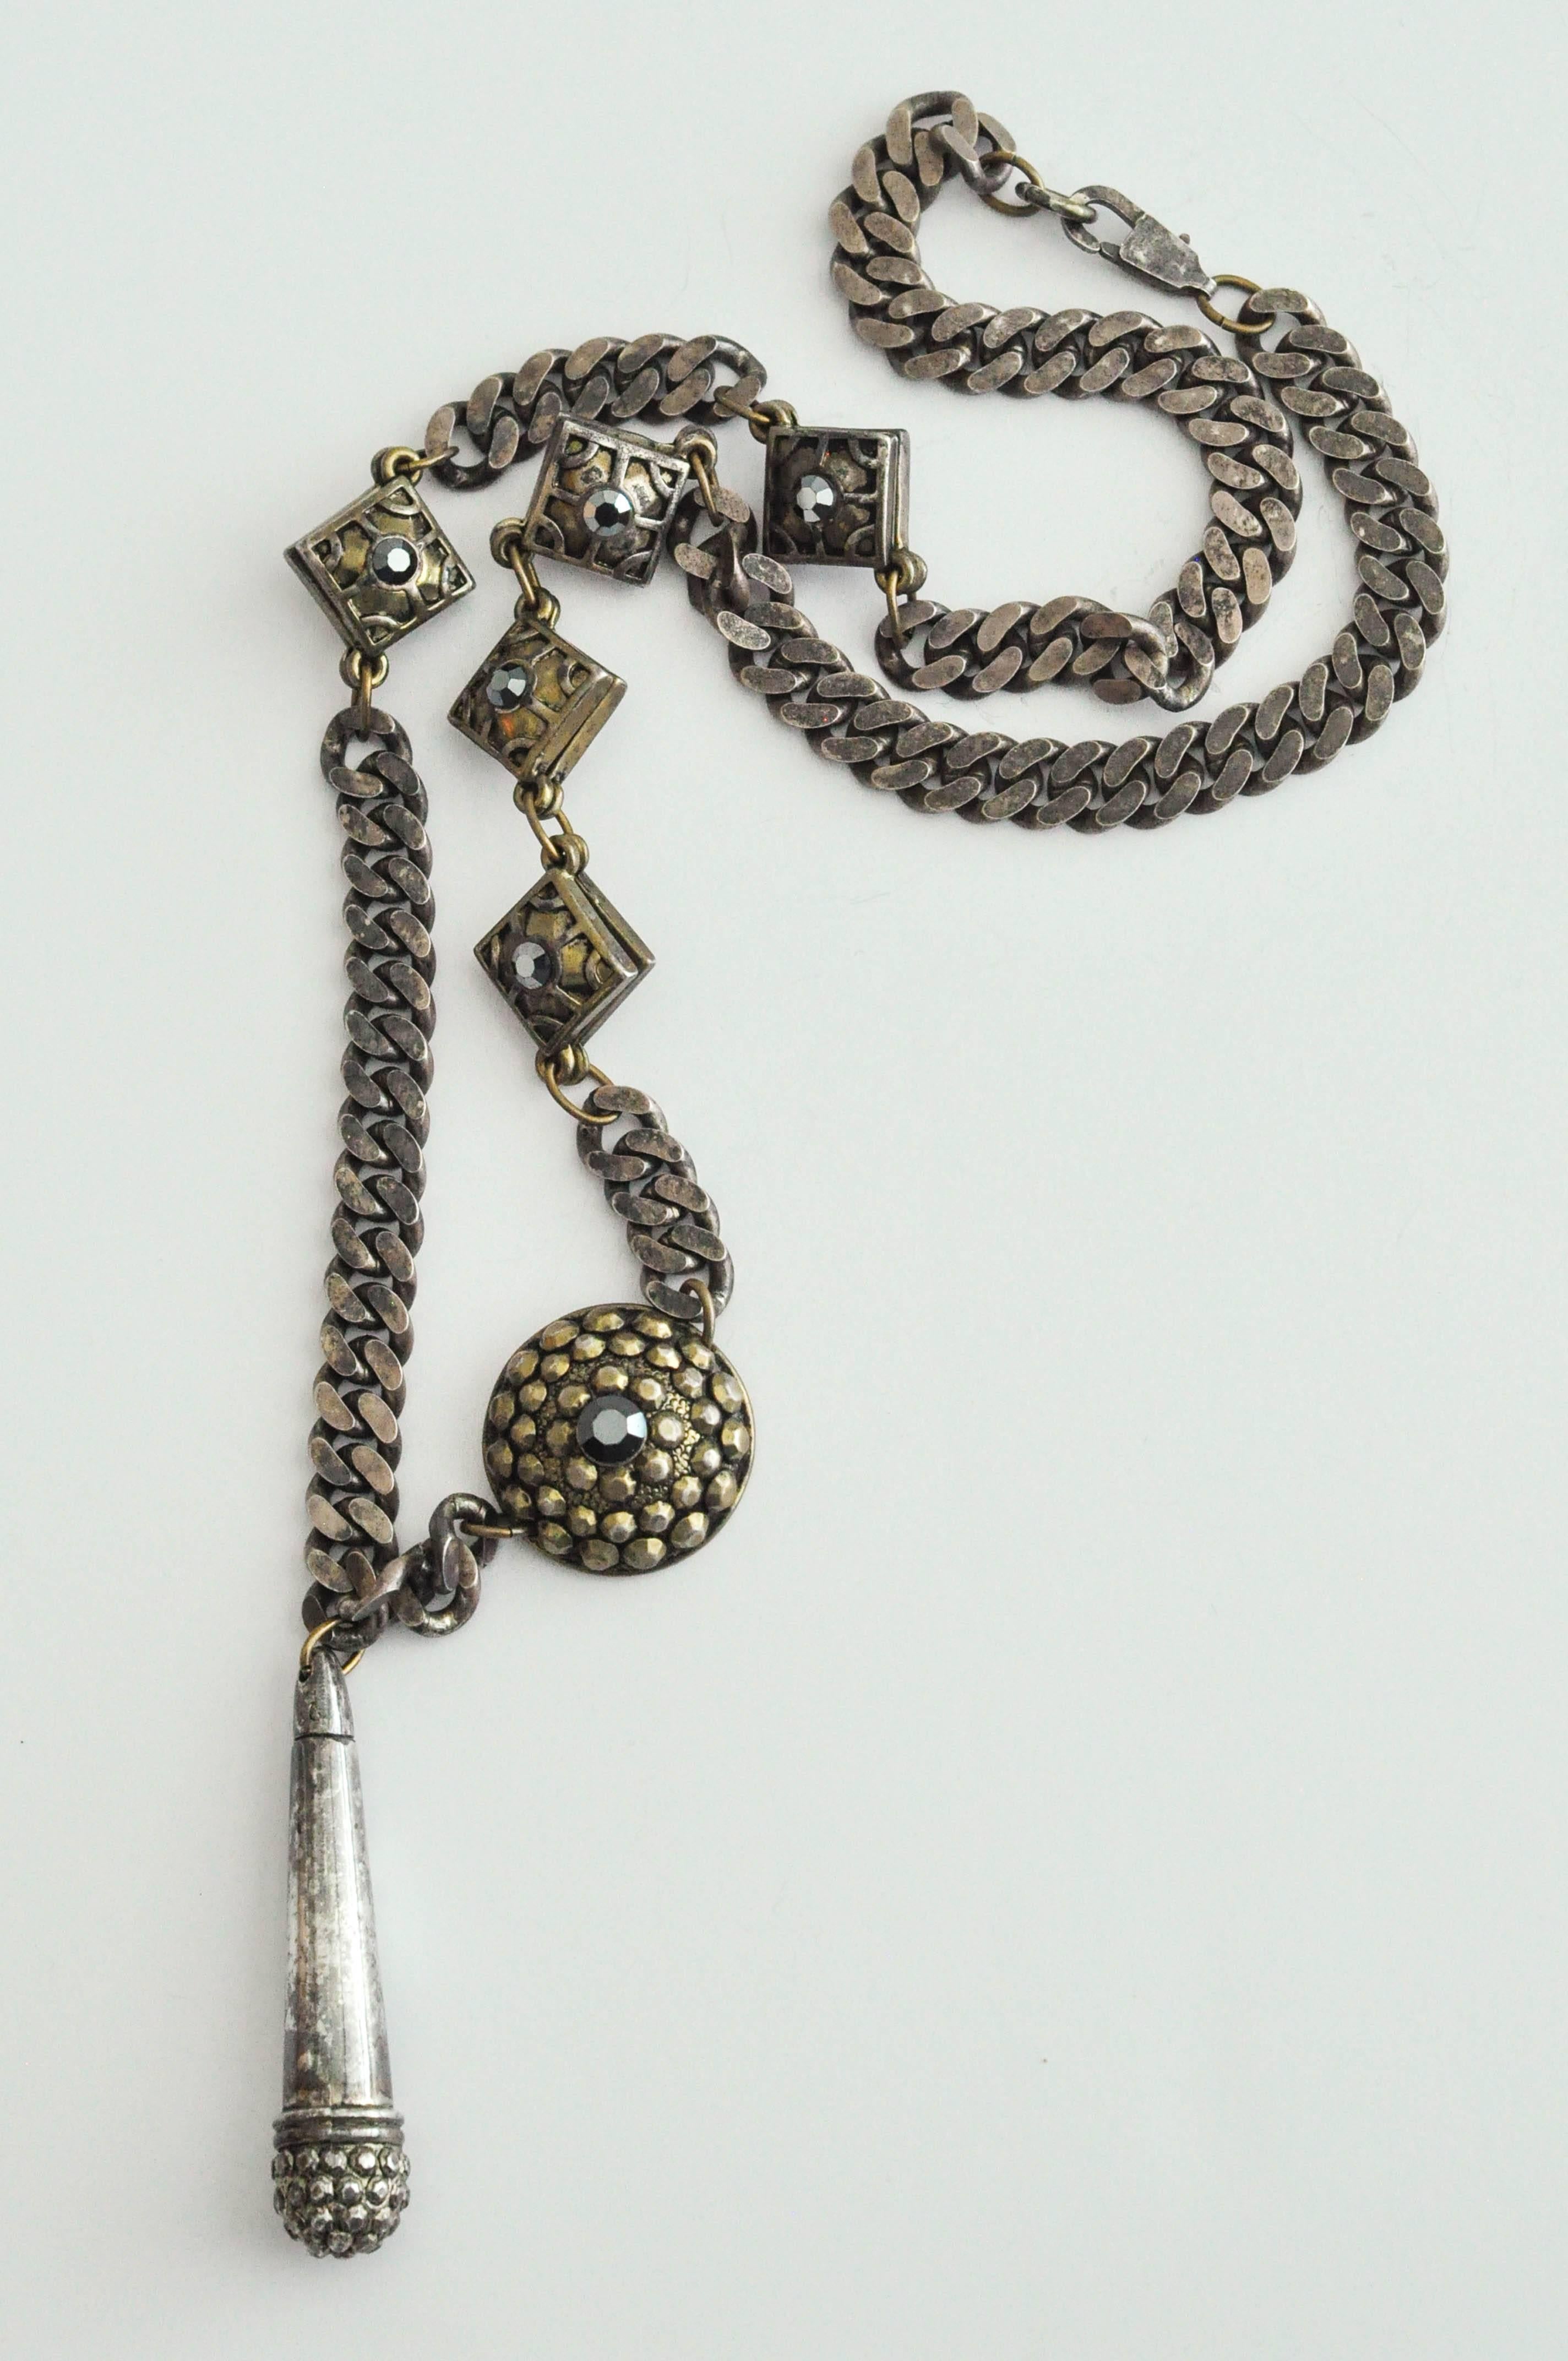 An early, silver and bronze -tone chain necklace by French couture designer Jean Paul Gaultier (b. 1952).  Known as the enfant terrible of French fashion, Gaultier's designs were brilliantly irreverent, drawing upon street culture.  This very, very